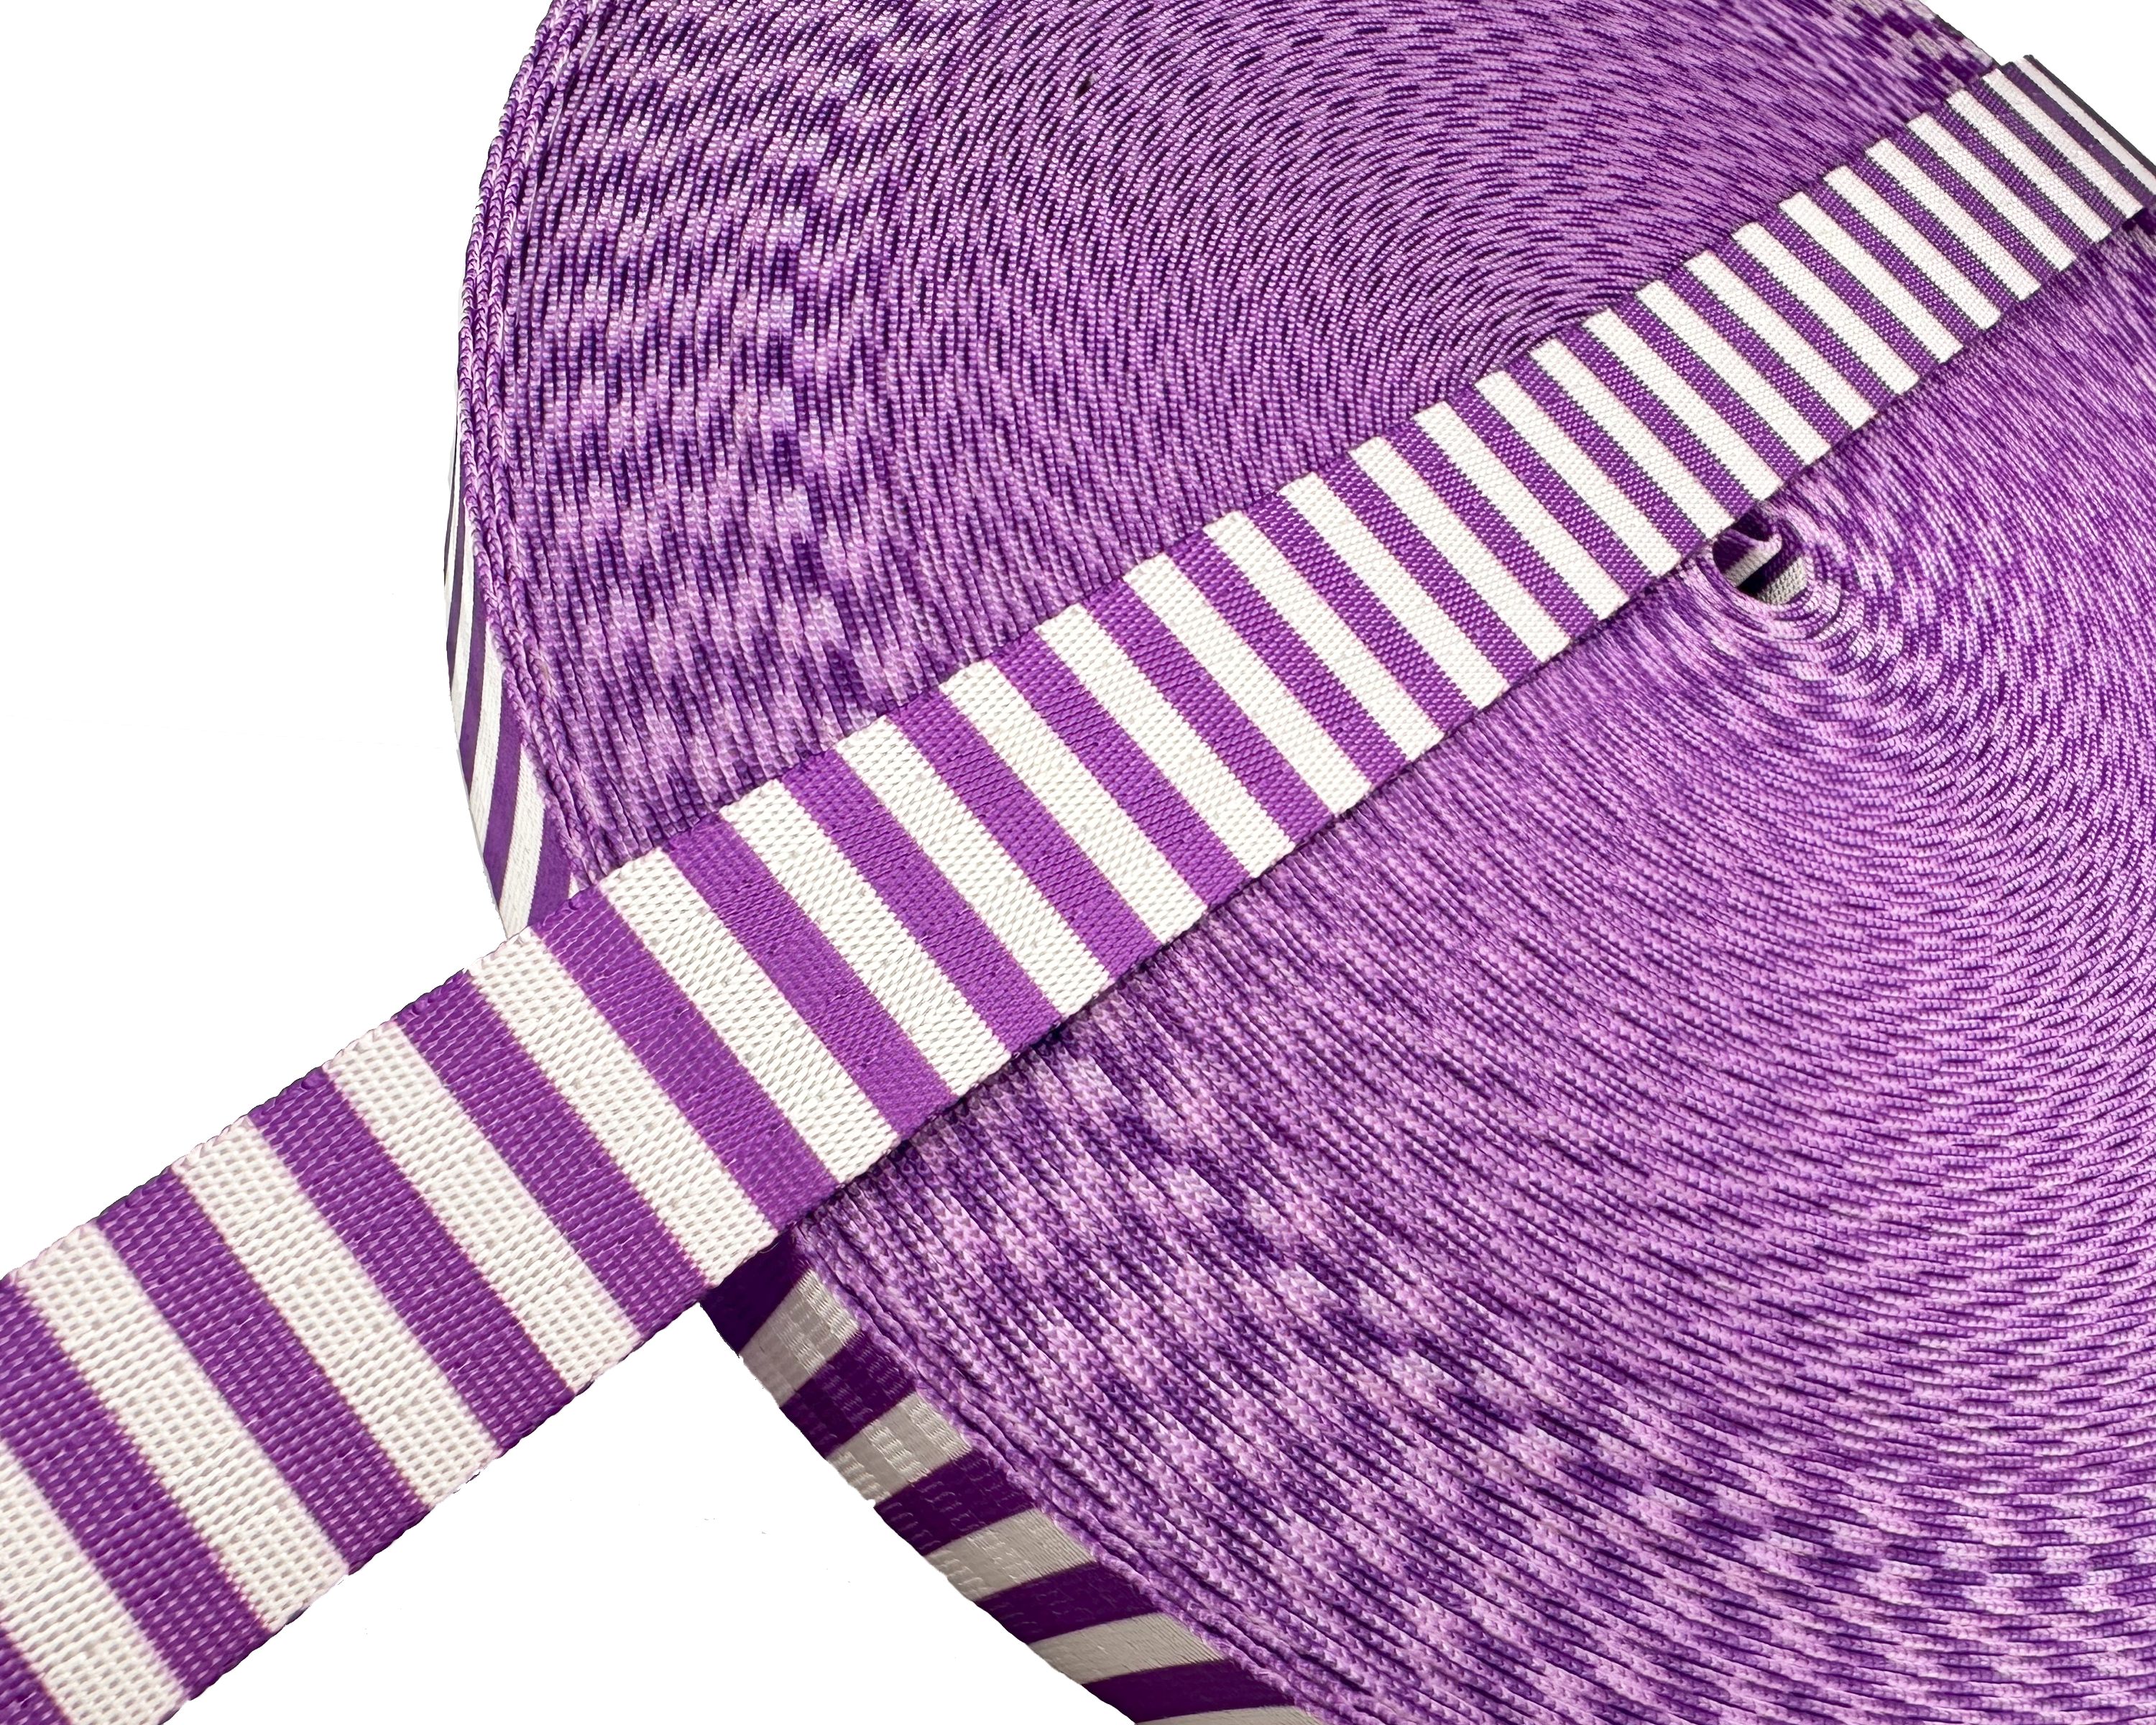 25mm Purple and White Stripe Webbing Straps for Bag Making